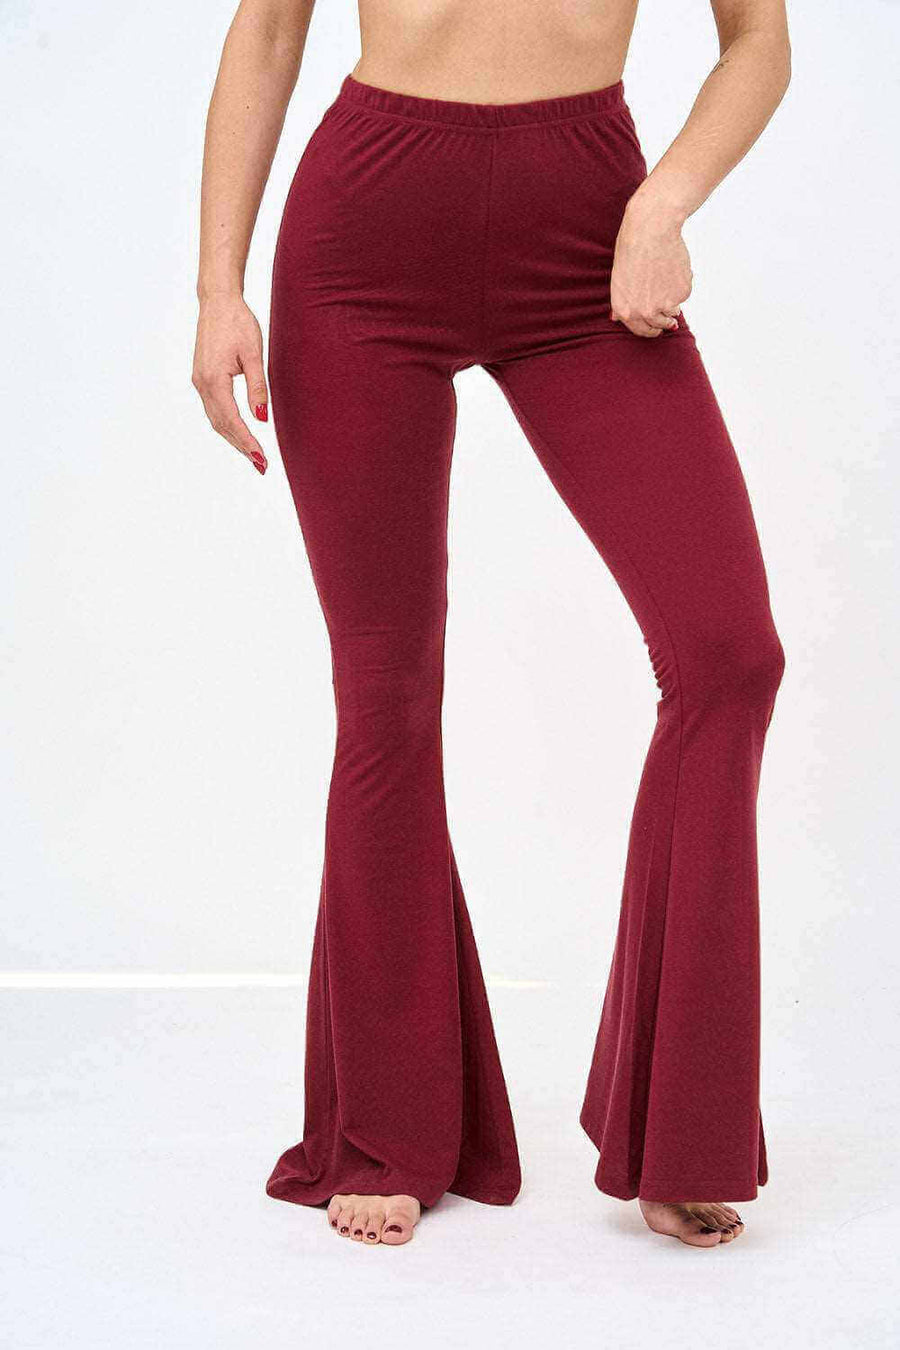 Close View of Womens Bell Bottom Leggings in Maroon